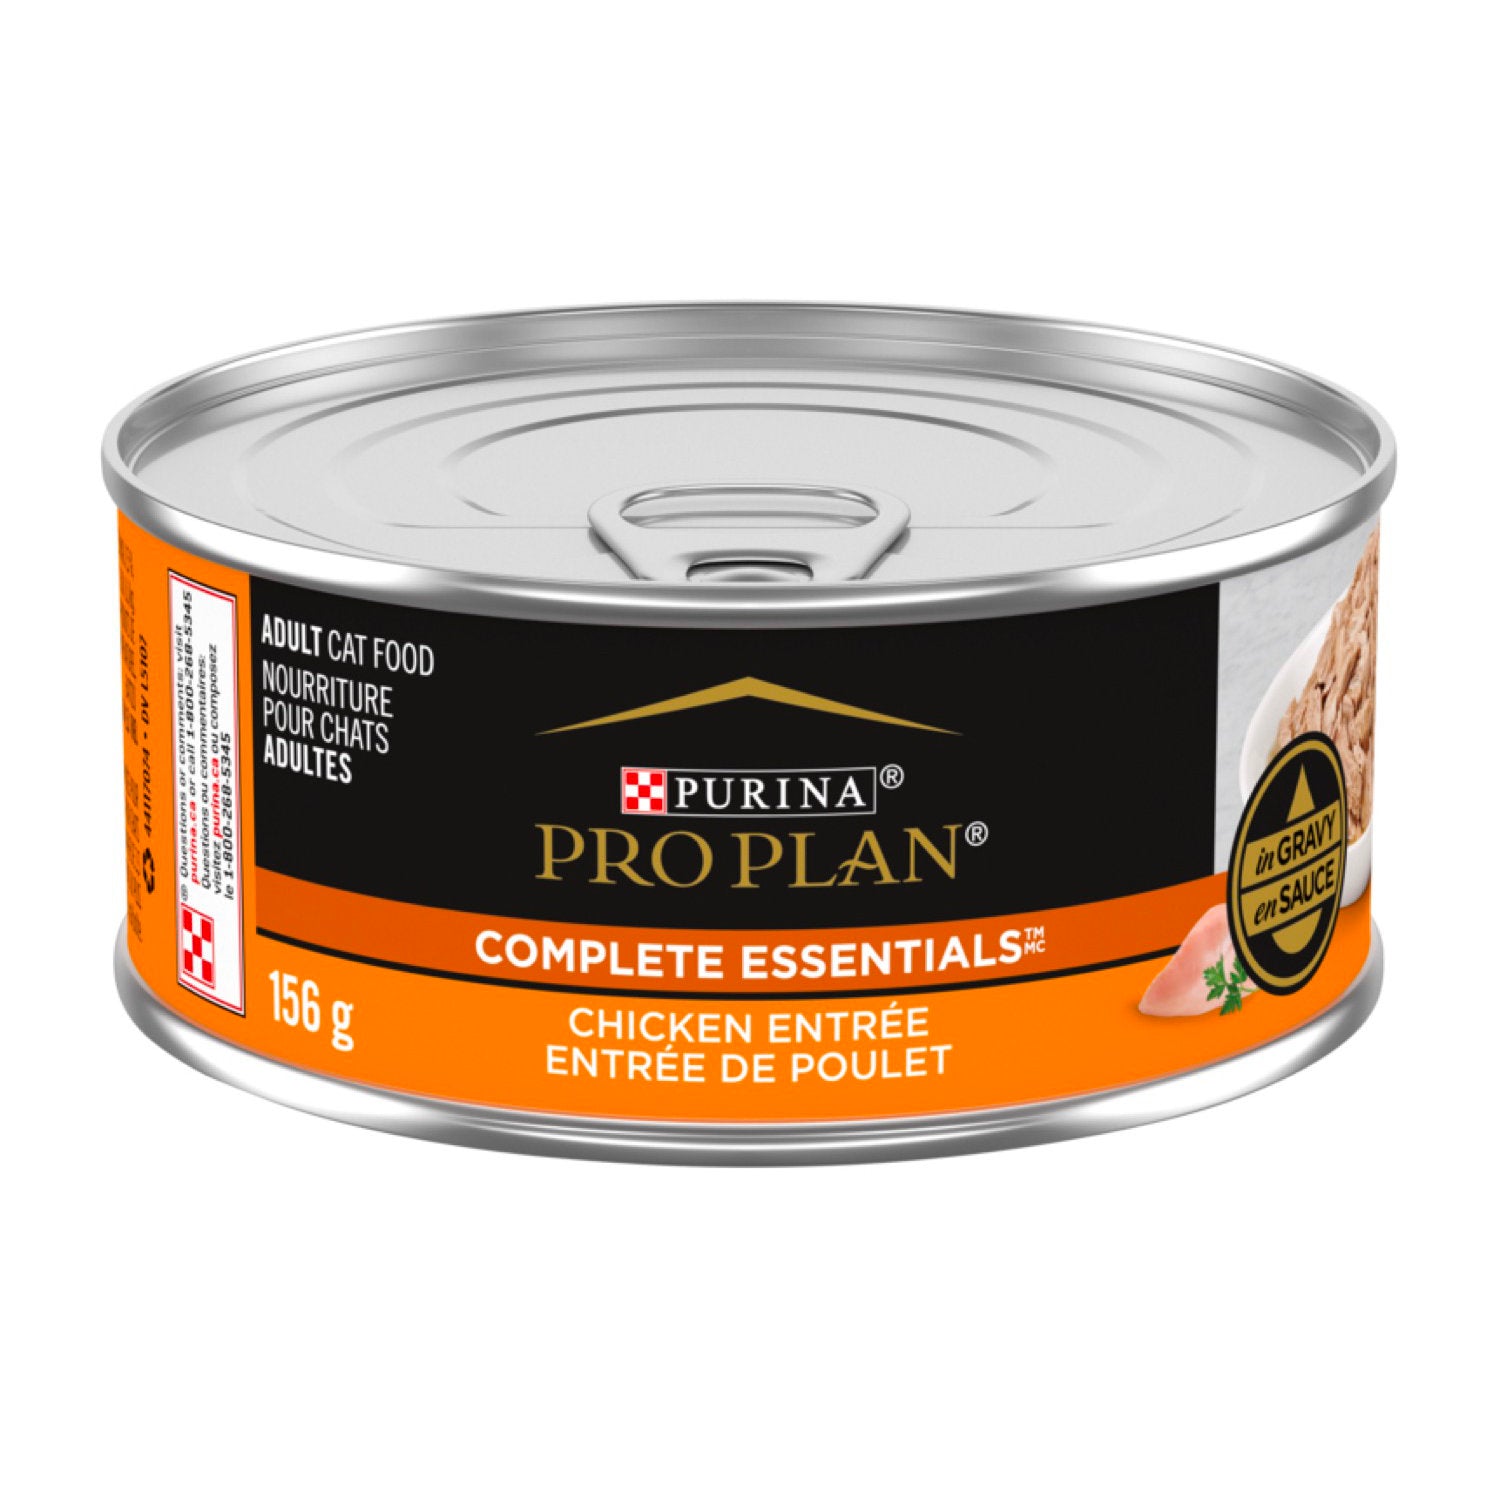 Purina Pro Plan Adult Complete Essentials Chicken Entrée in Gravy Wet Cat Food 156g  Canned Cat Food  | PetMax Canada